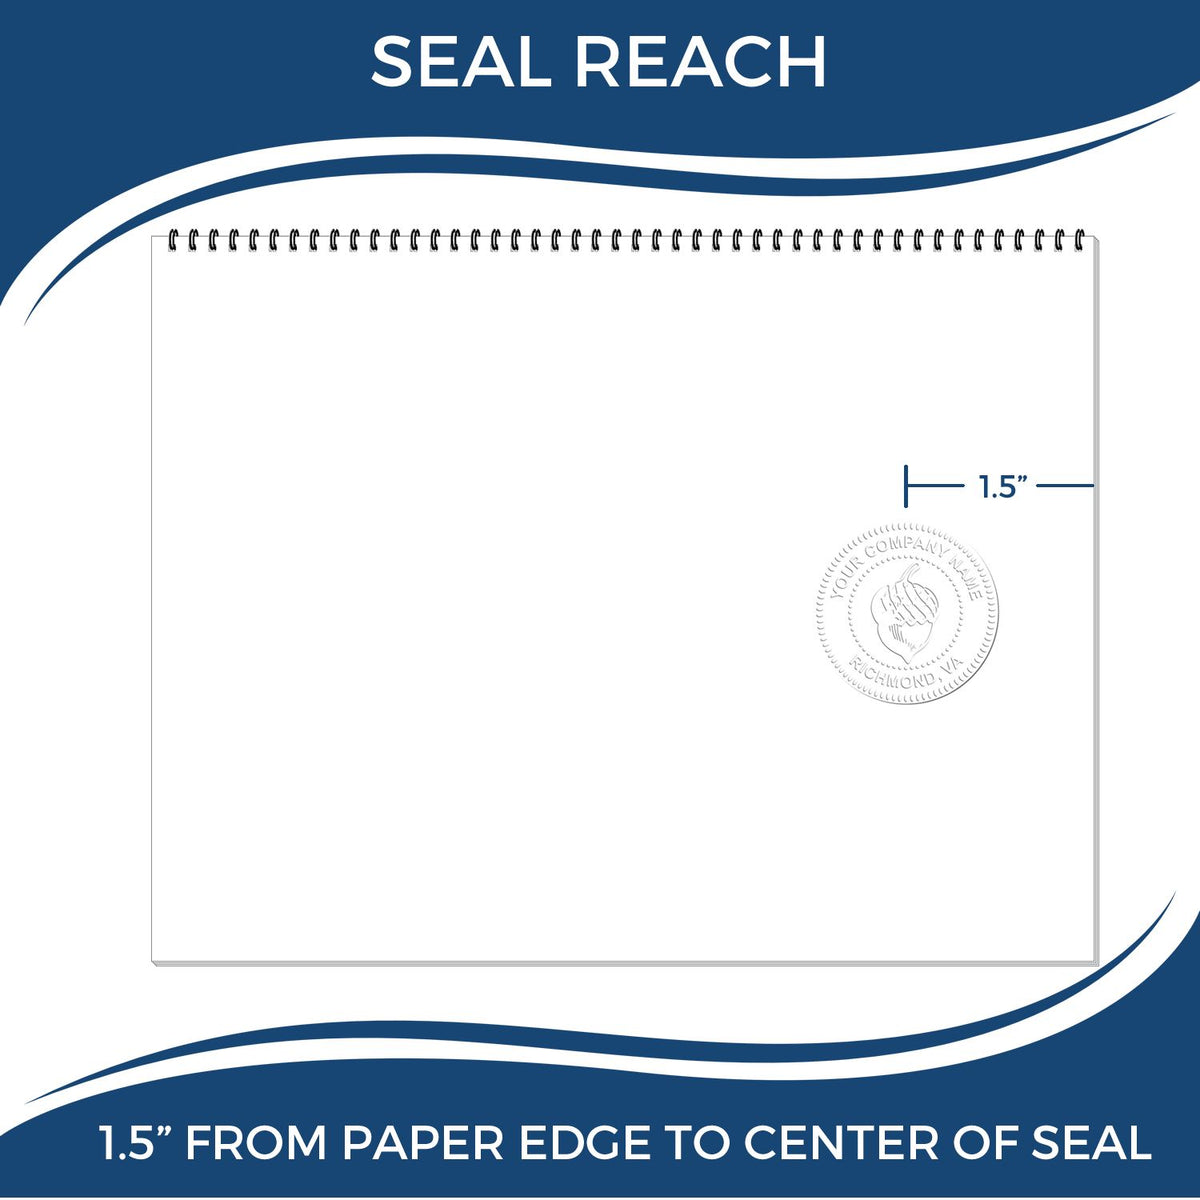 An infographic showing the seal reach which is represented by a ruler and a miniature seal image of the Soft Massachusetts Professional Geologist Seal